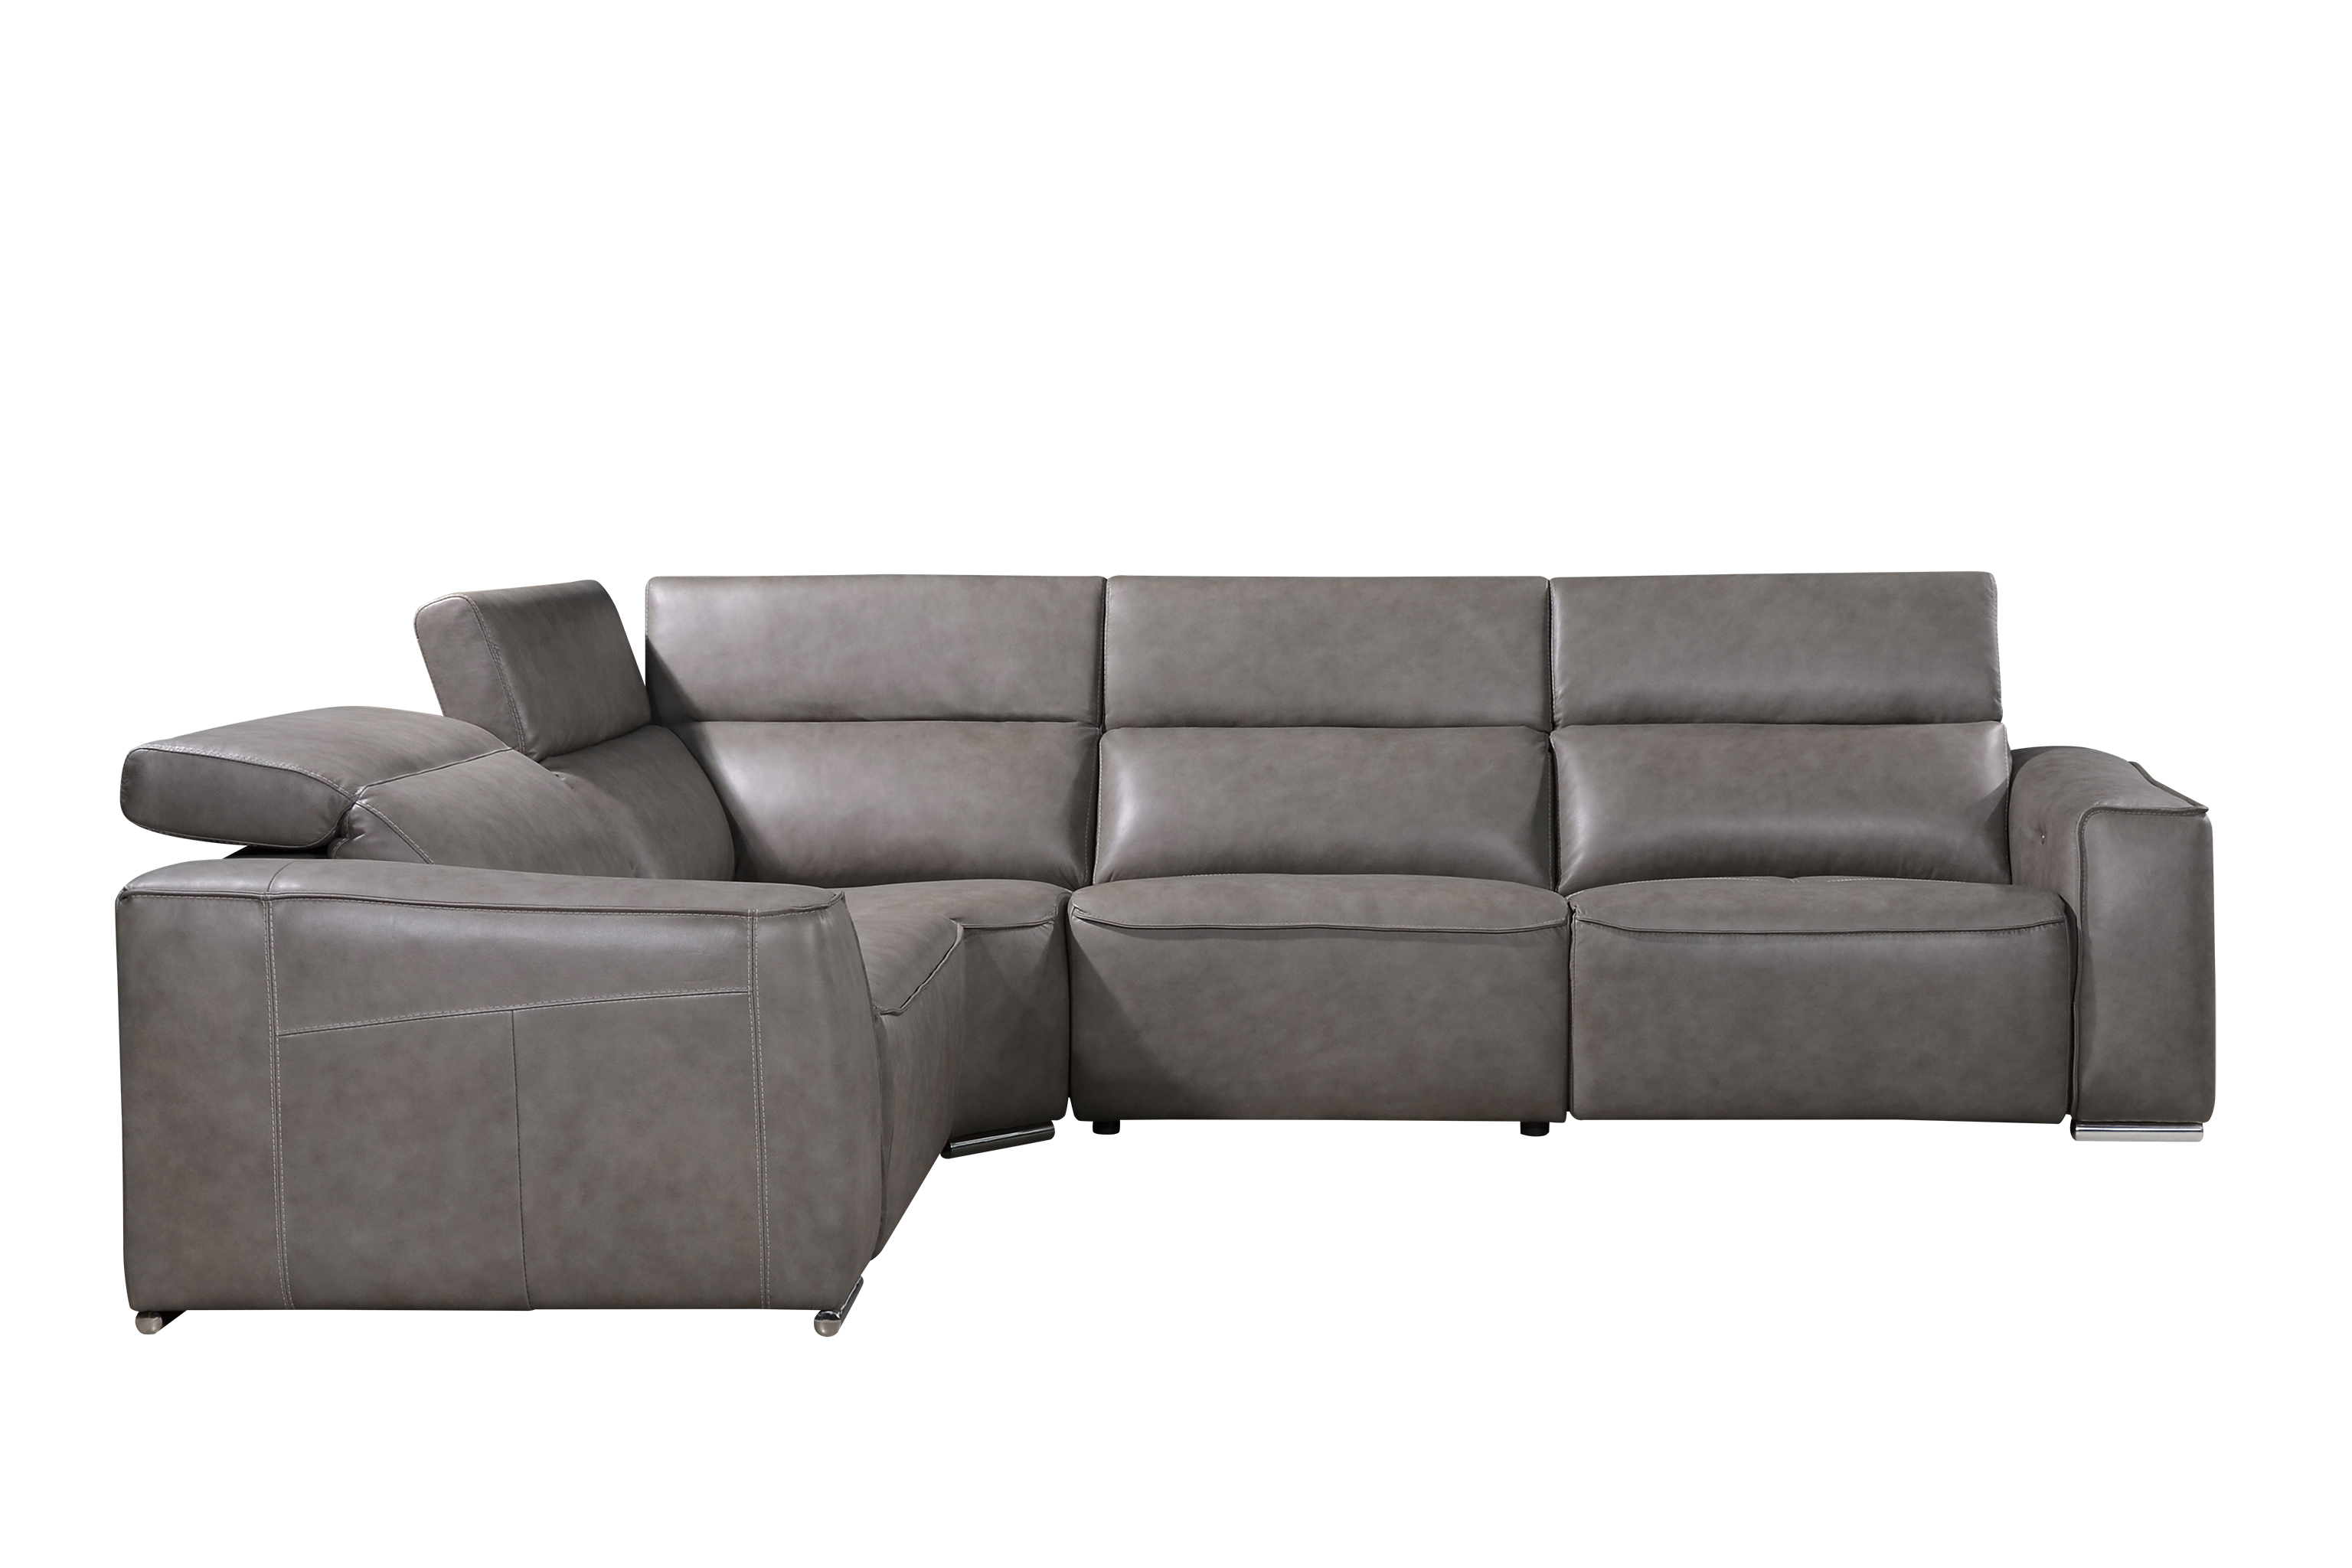 HENRIETTA Sectional Recliner Sofa in Leather by Castilla